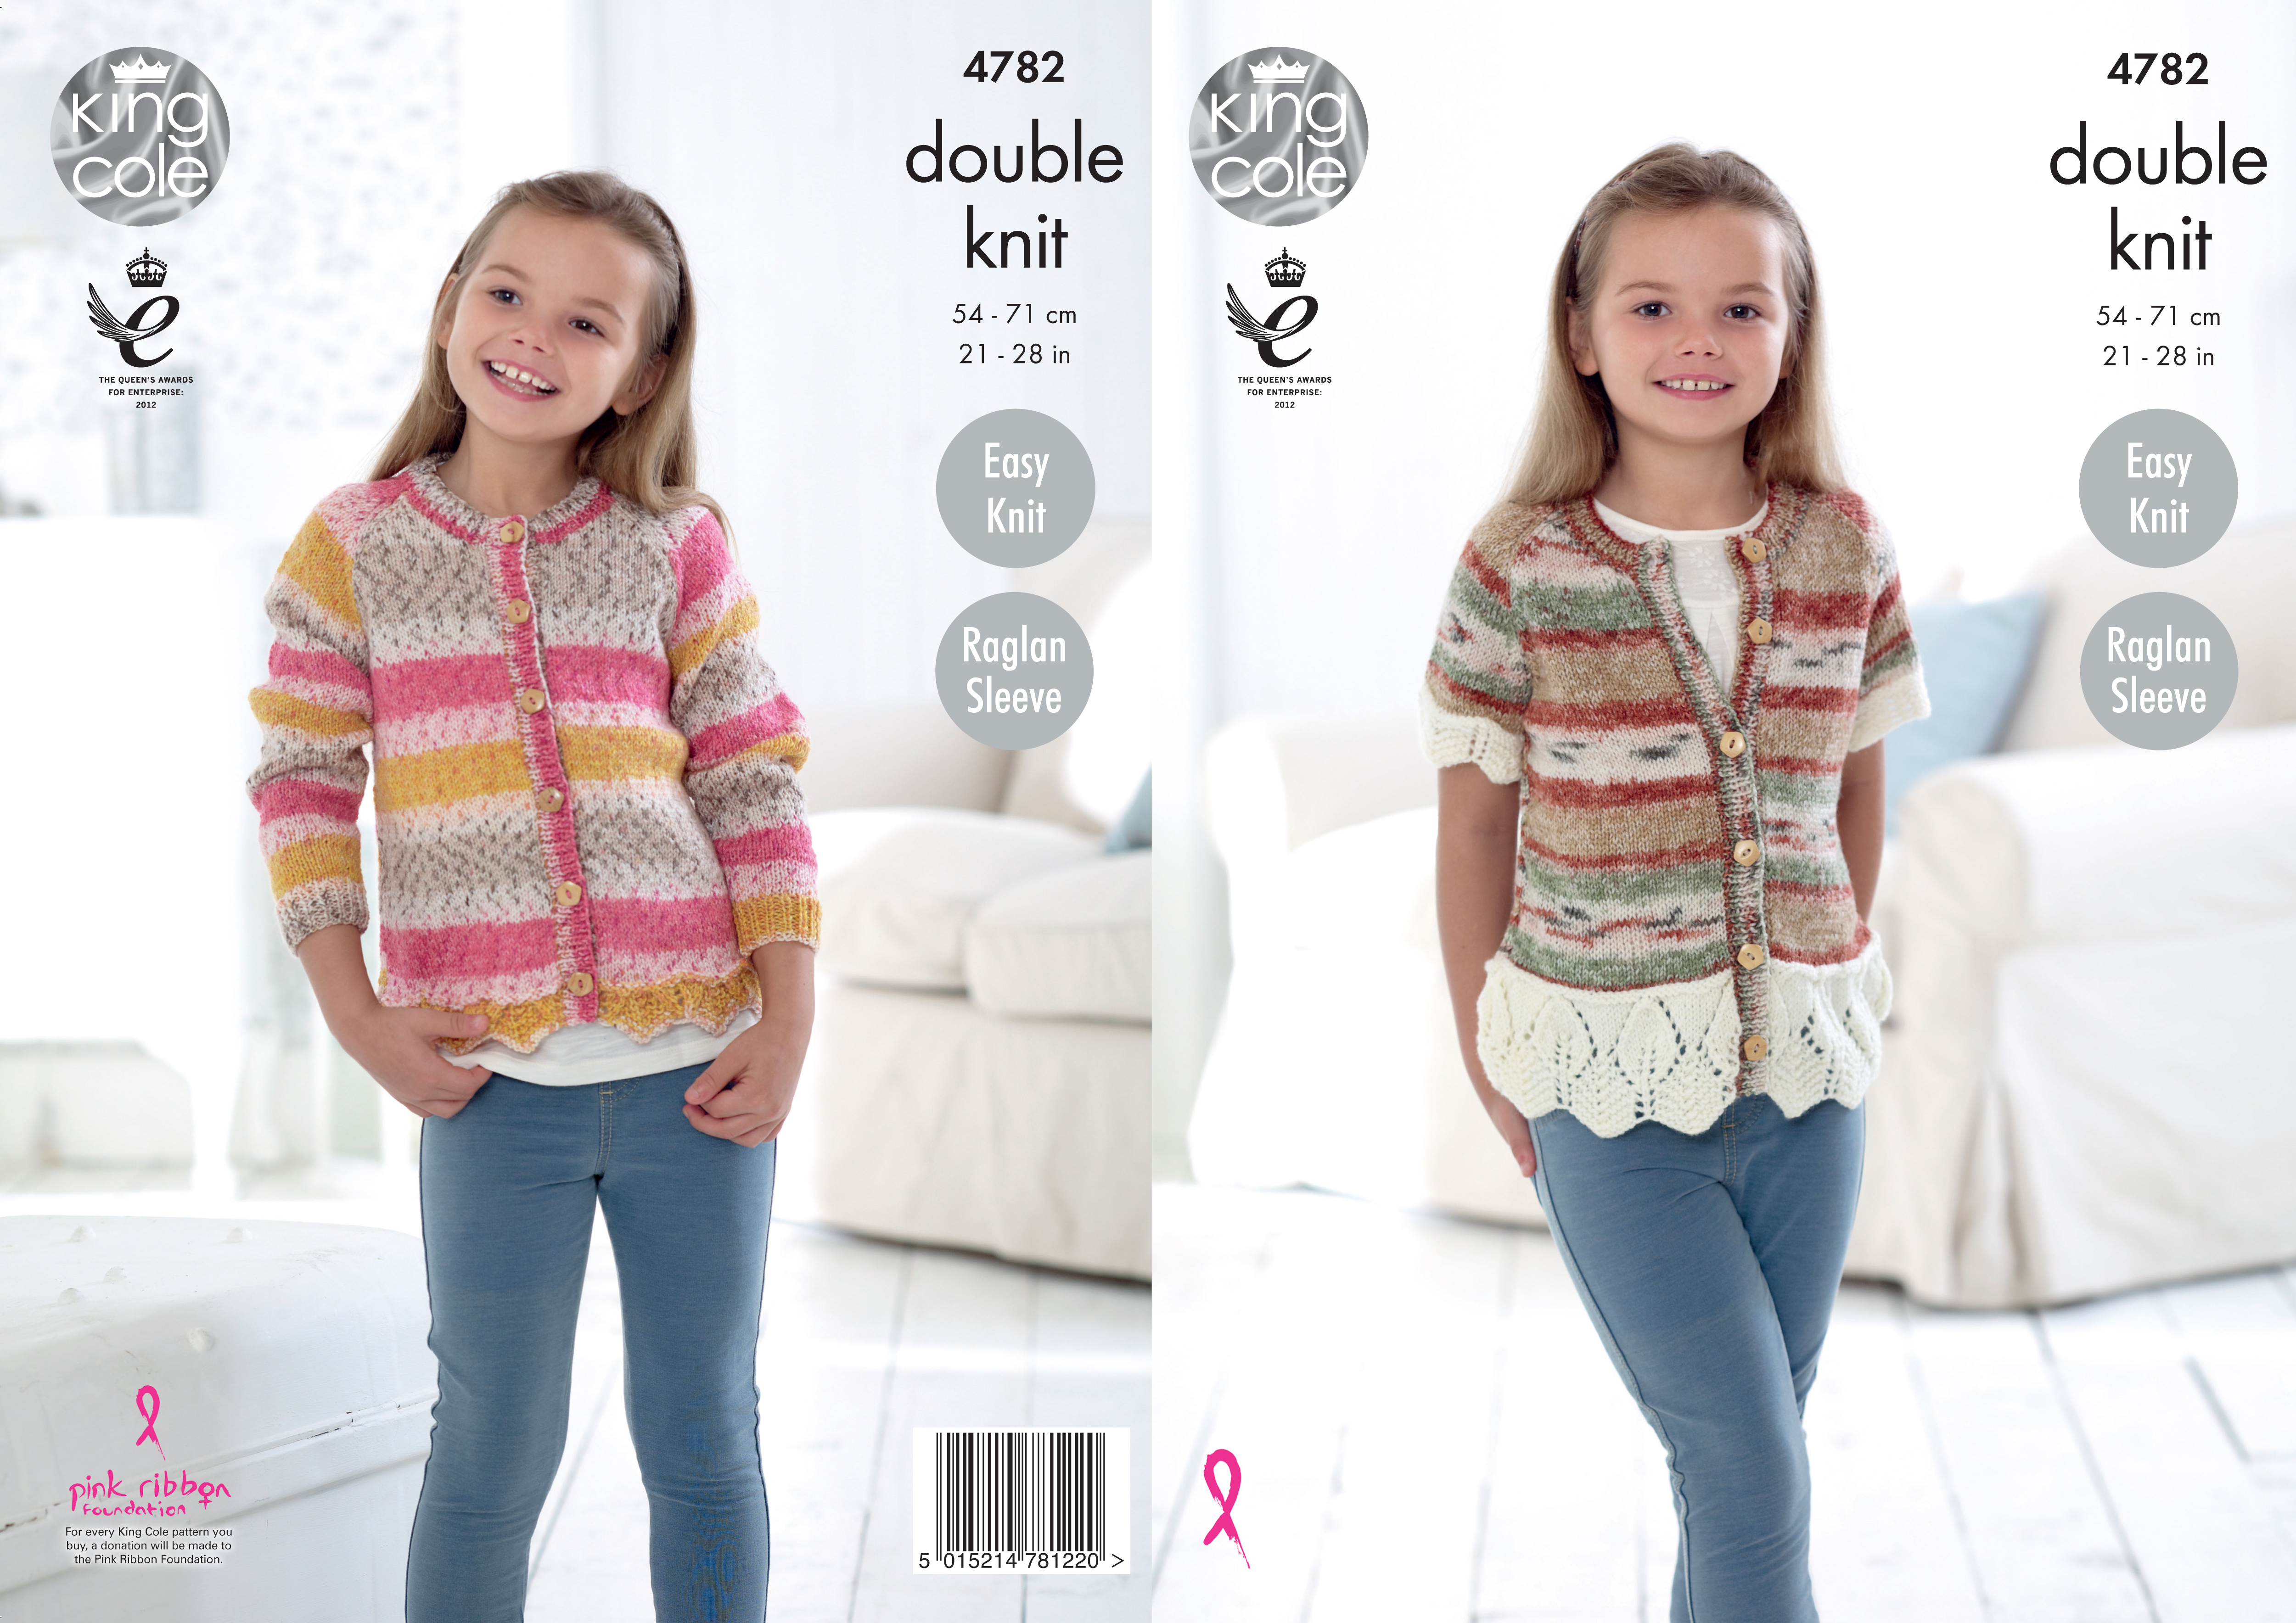 Cardigans Knitted with Splash DK 4782 x3